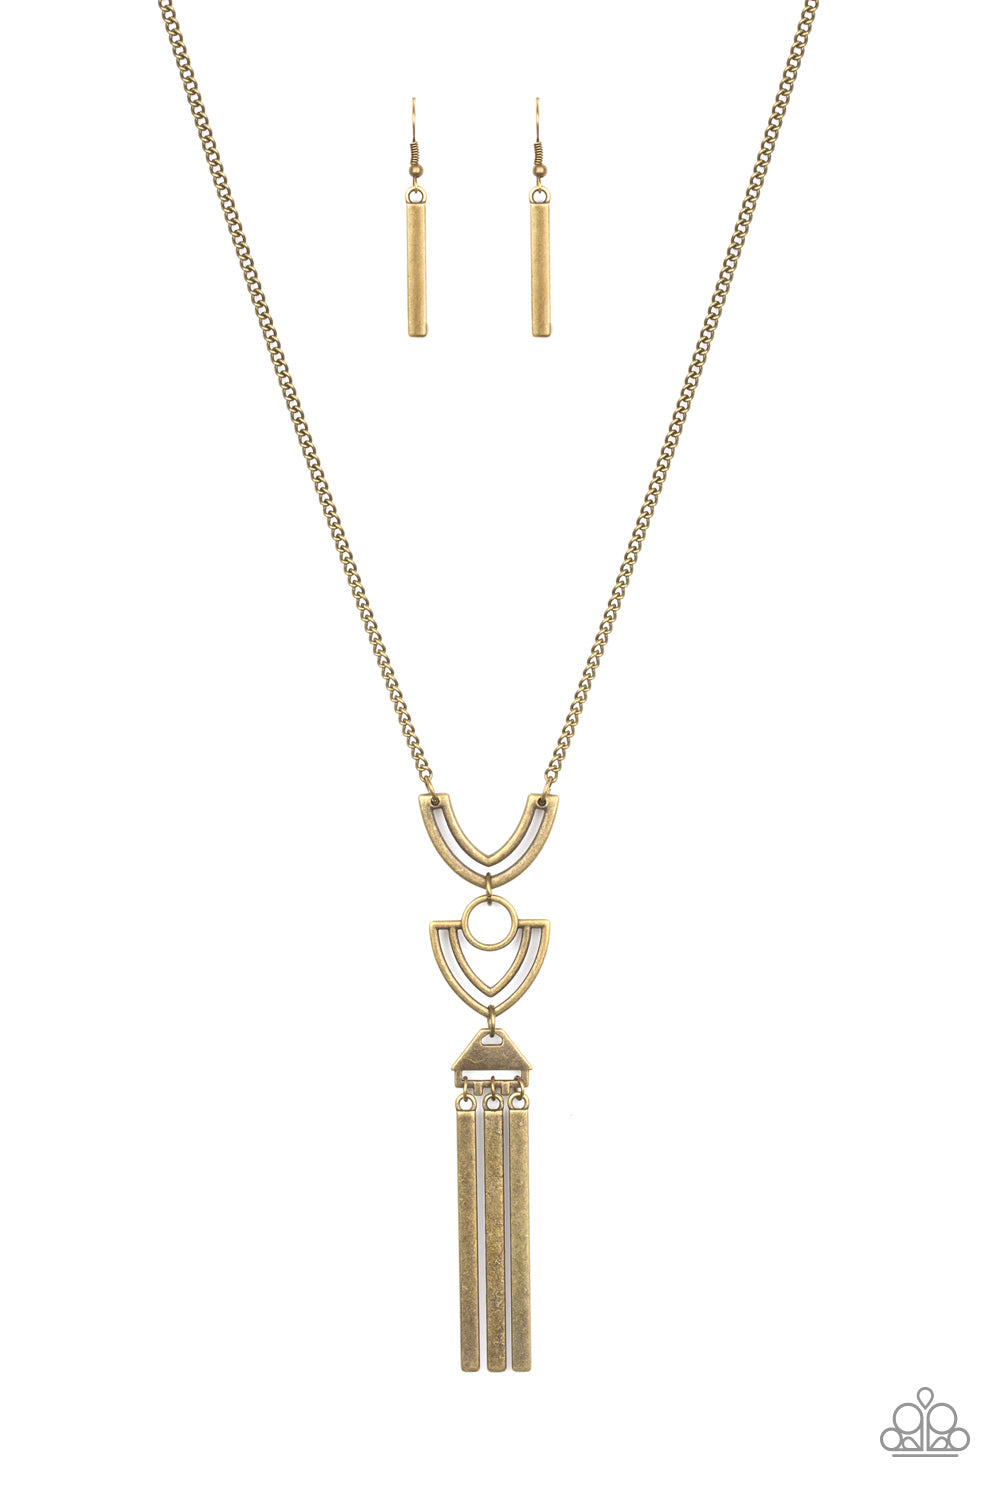 Paparazzi Accessories Confidently Cleopatra - Brass